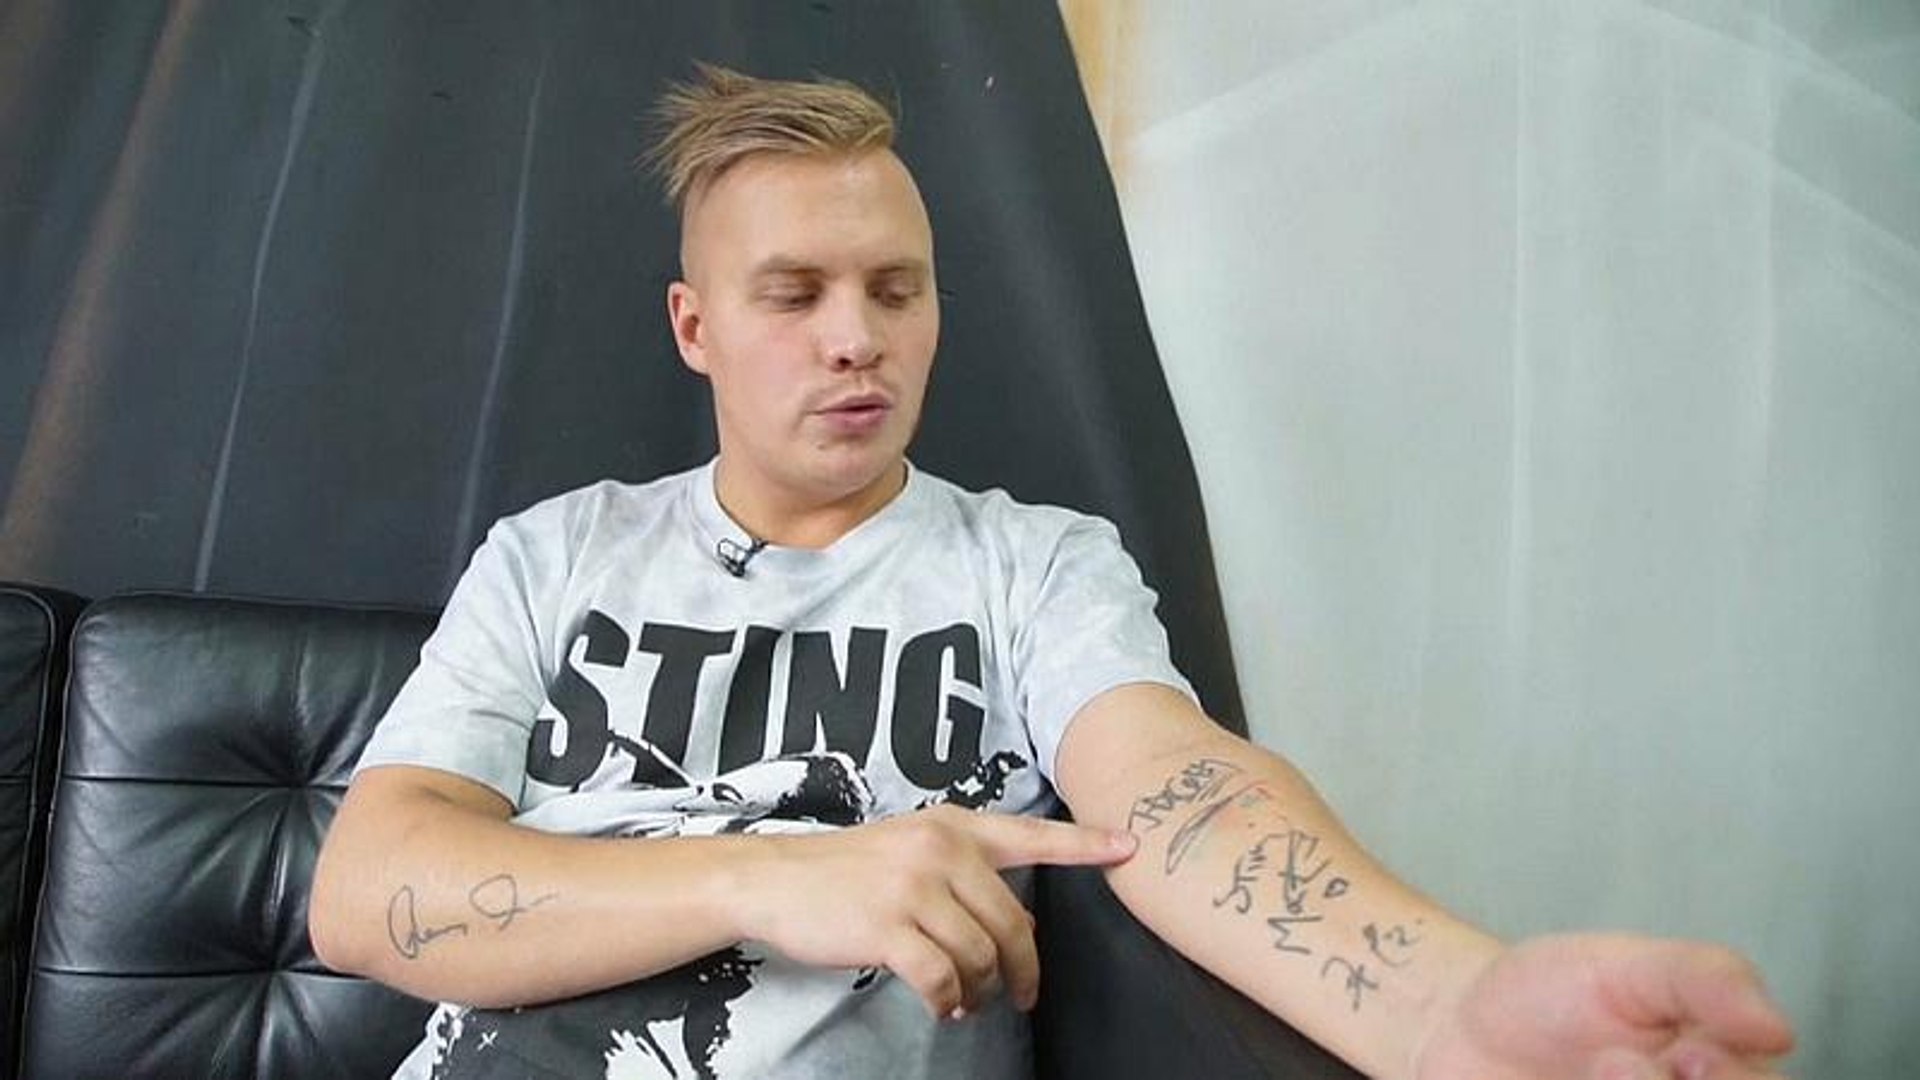 Watch: Russian rock music fan auctions skin tattooed with autographs -  video Dailymotion